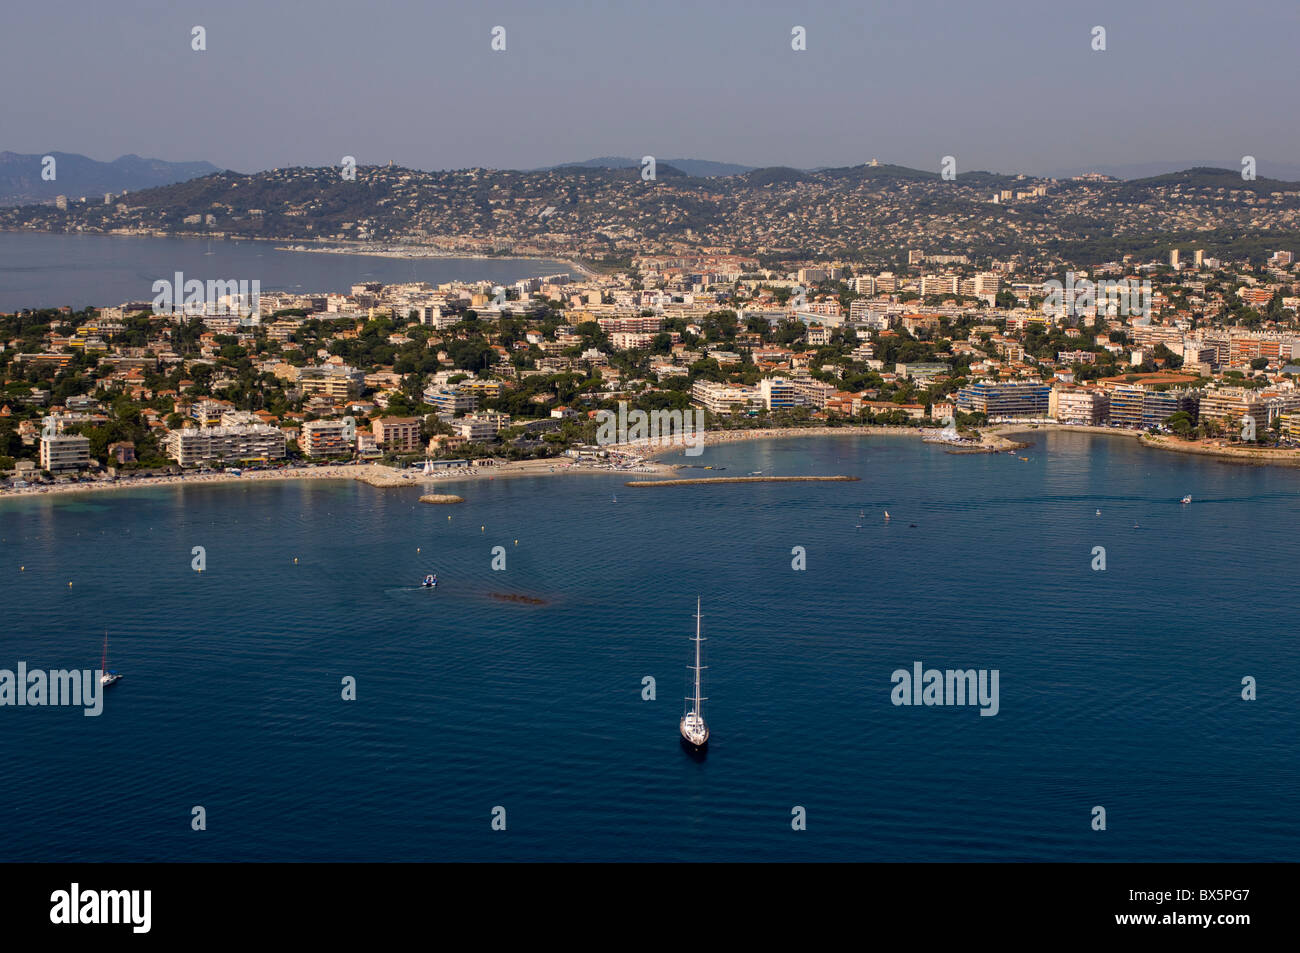 View from helicopter of Cap d'Antibes, Alpes-Maritimes, Provence, Cote d'Azur, French Riviera, France, Mediterranean, Europe Stock Photo